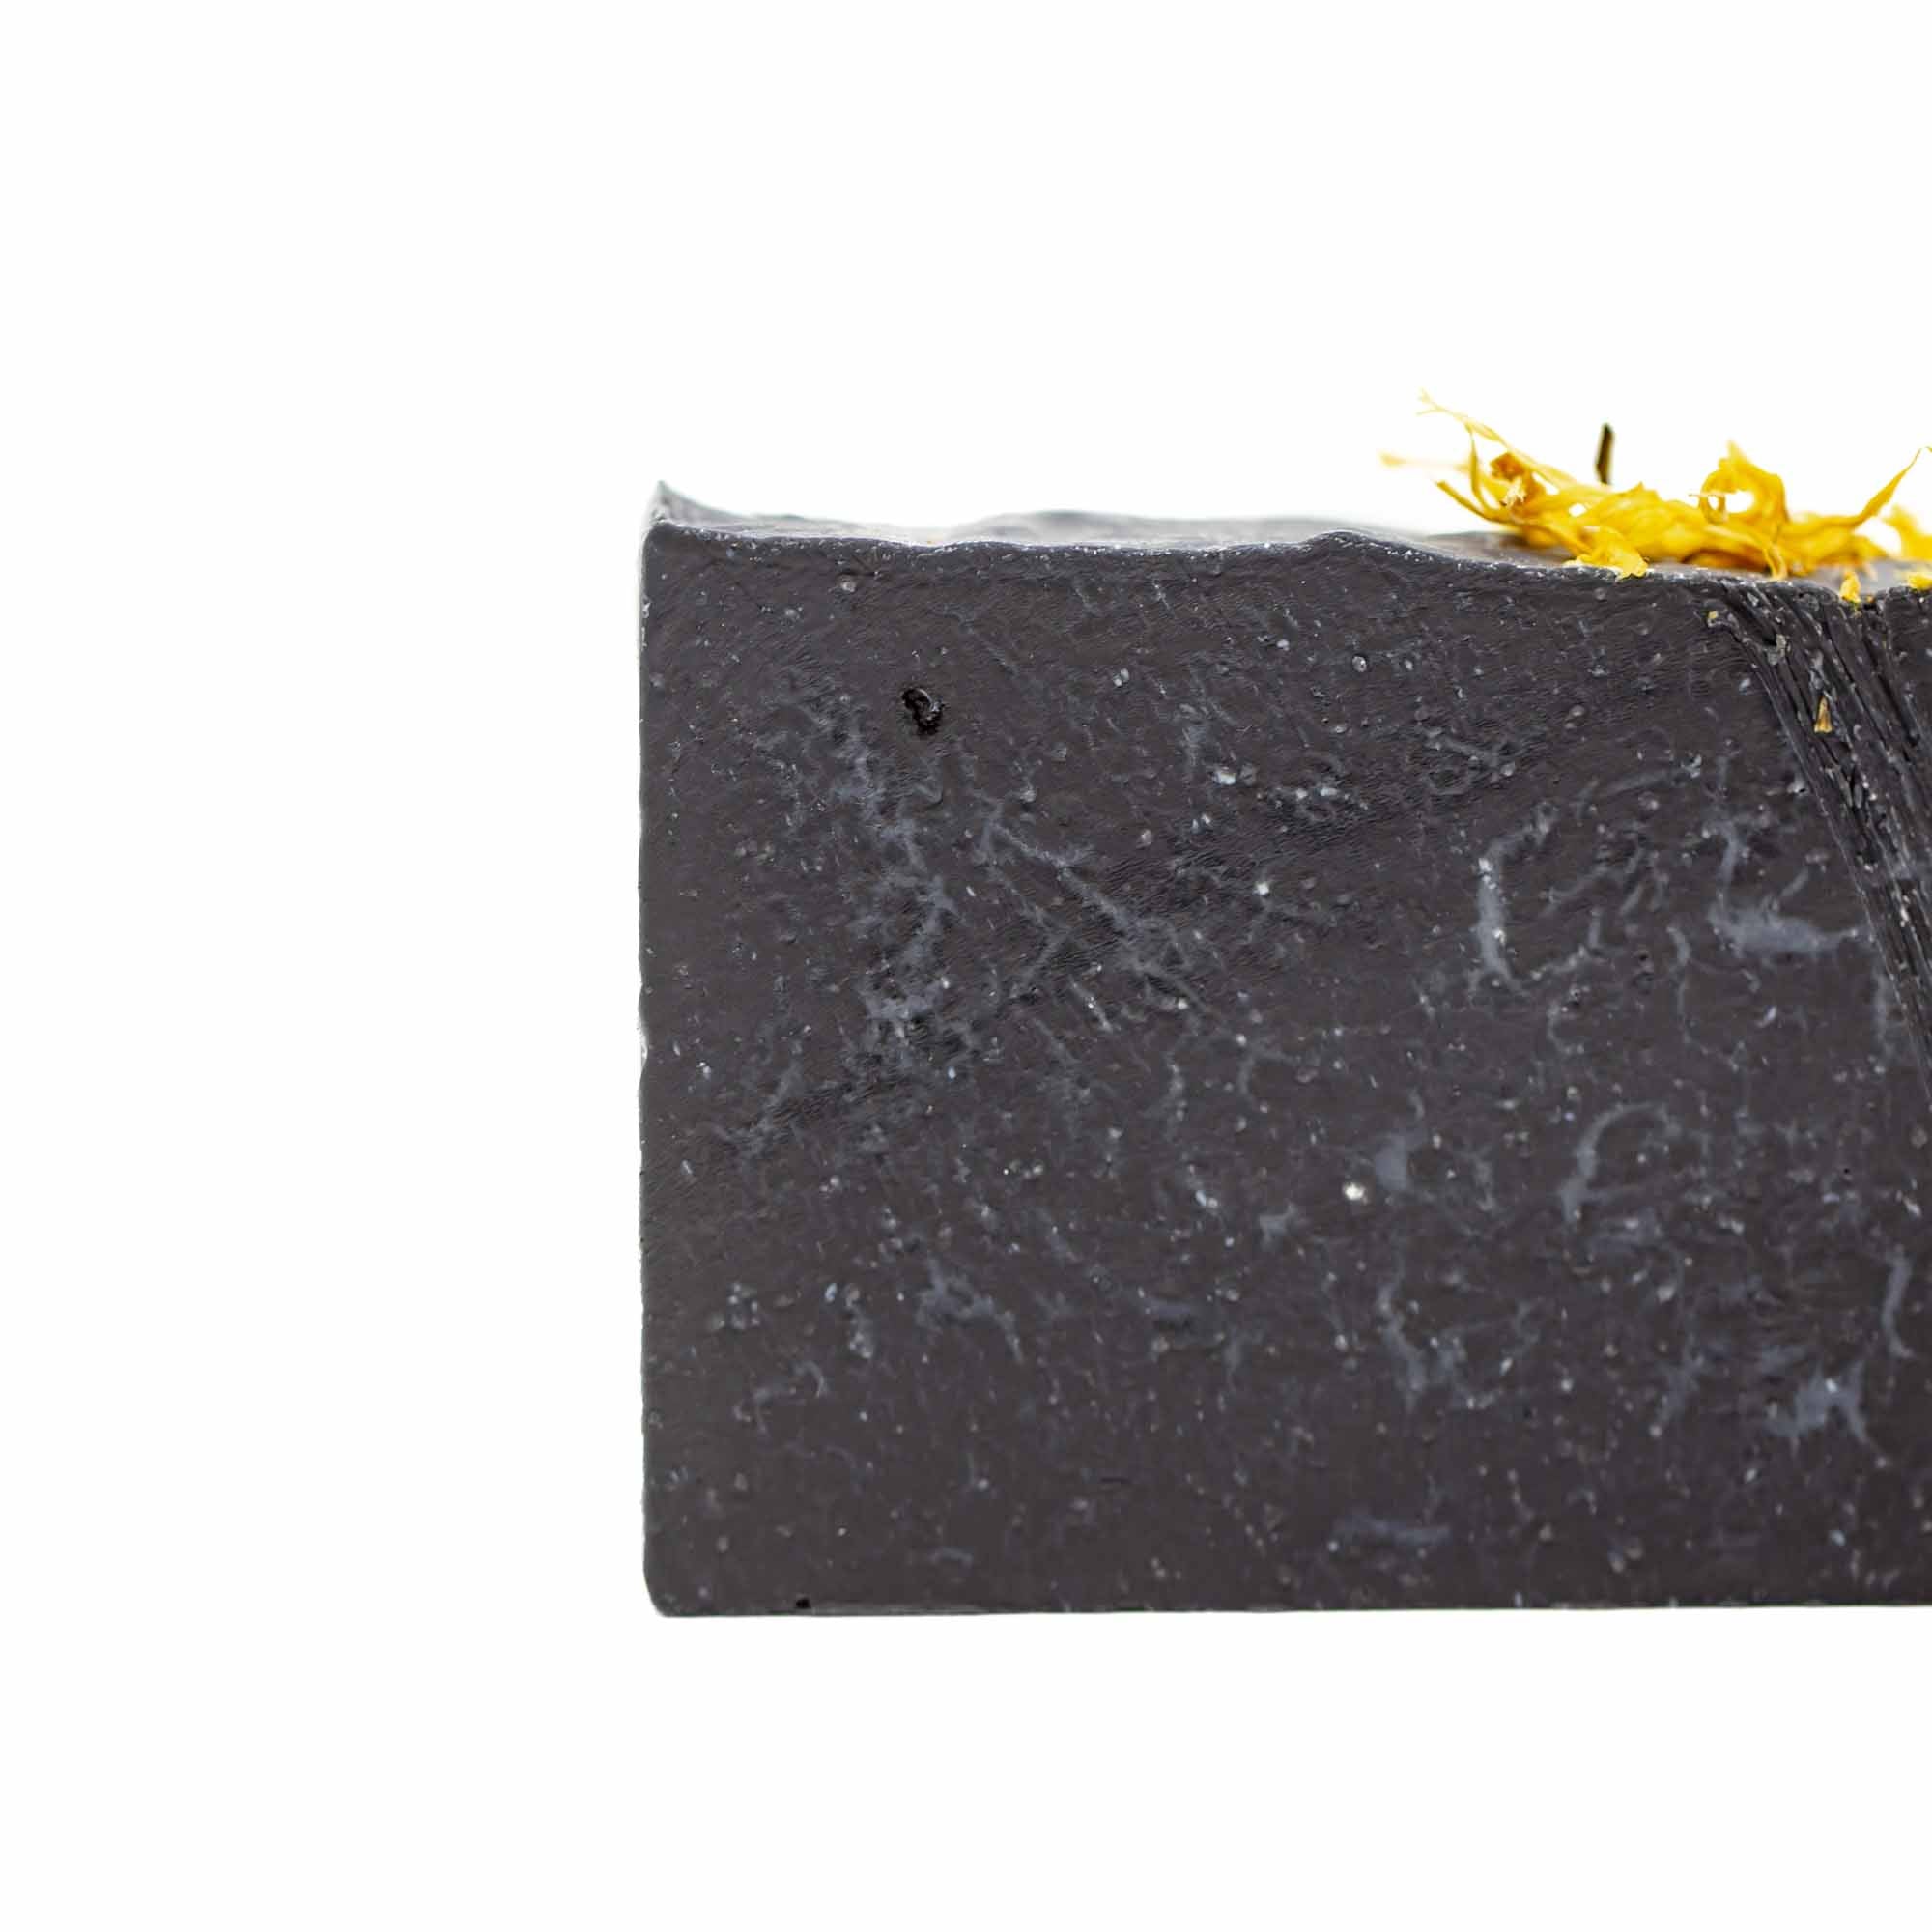 welliver goods - charcoal & tea bar soap - Mortise And Tenon